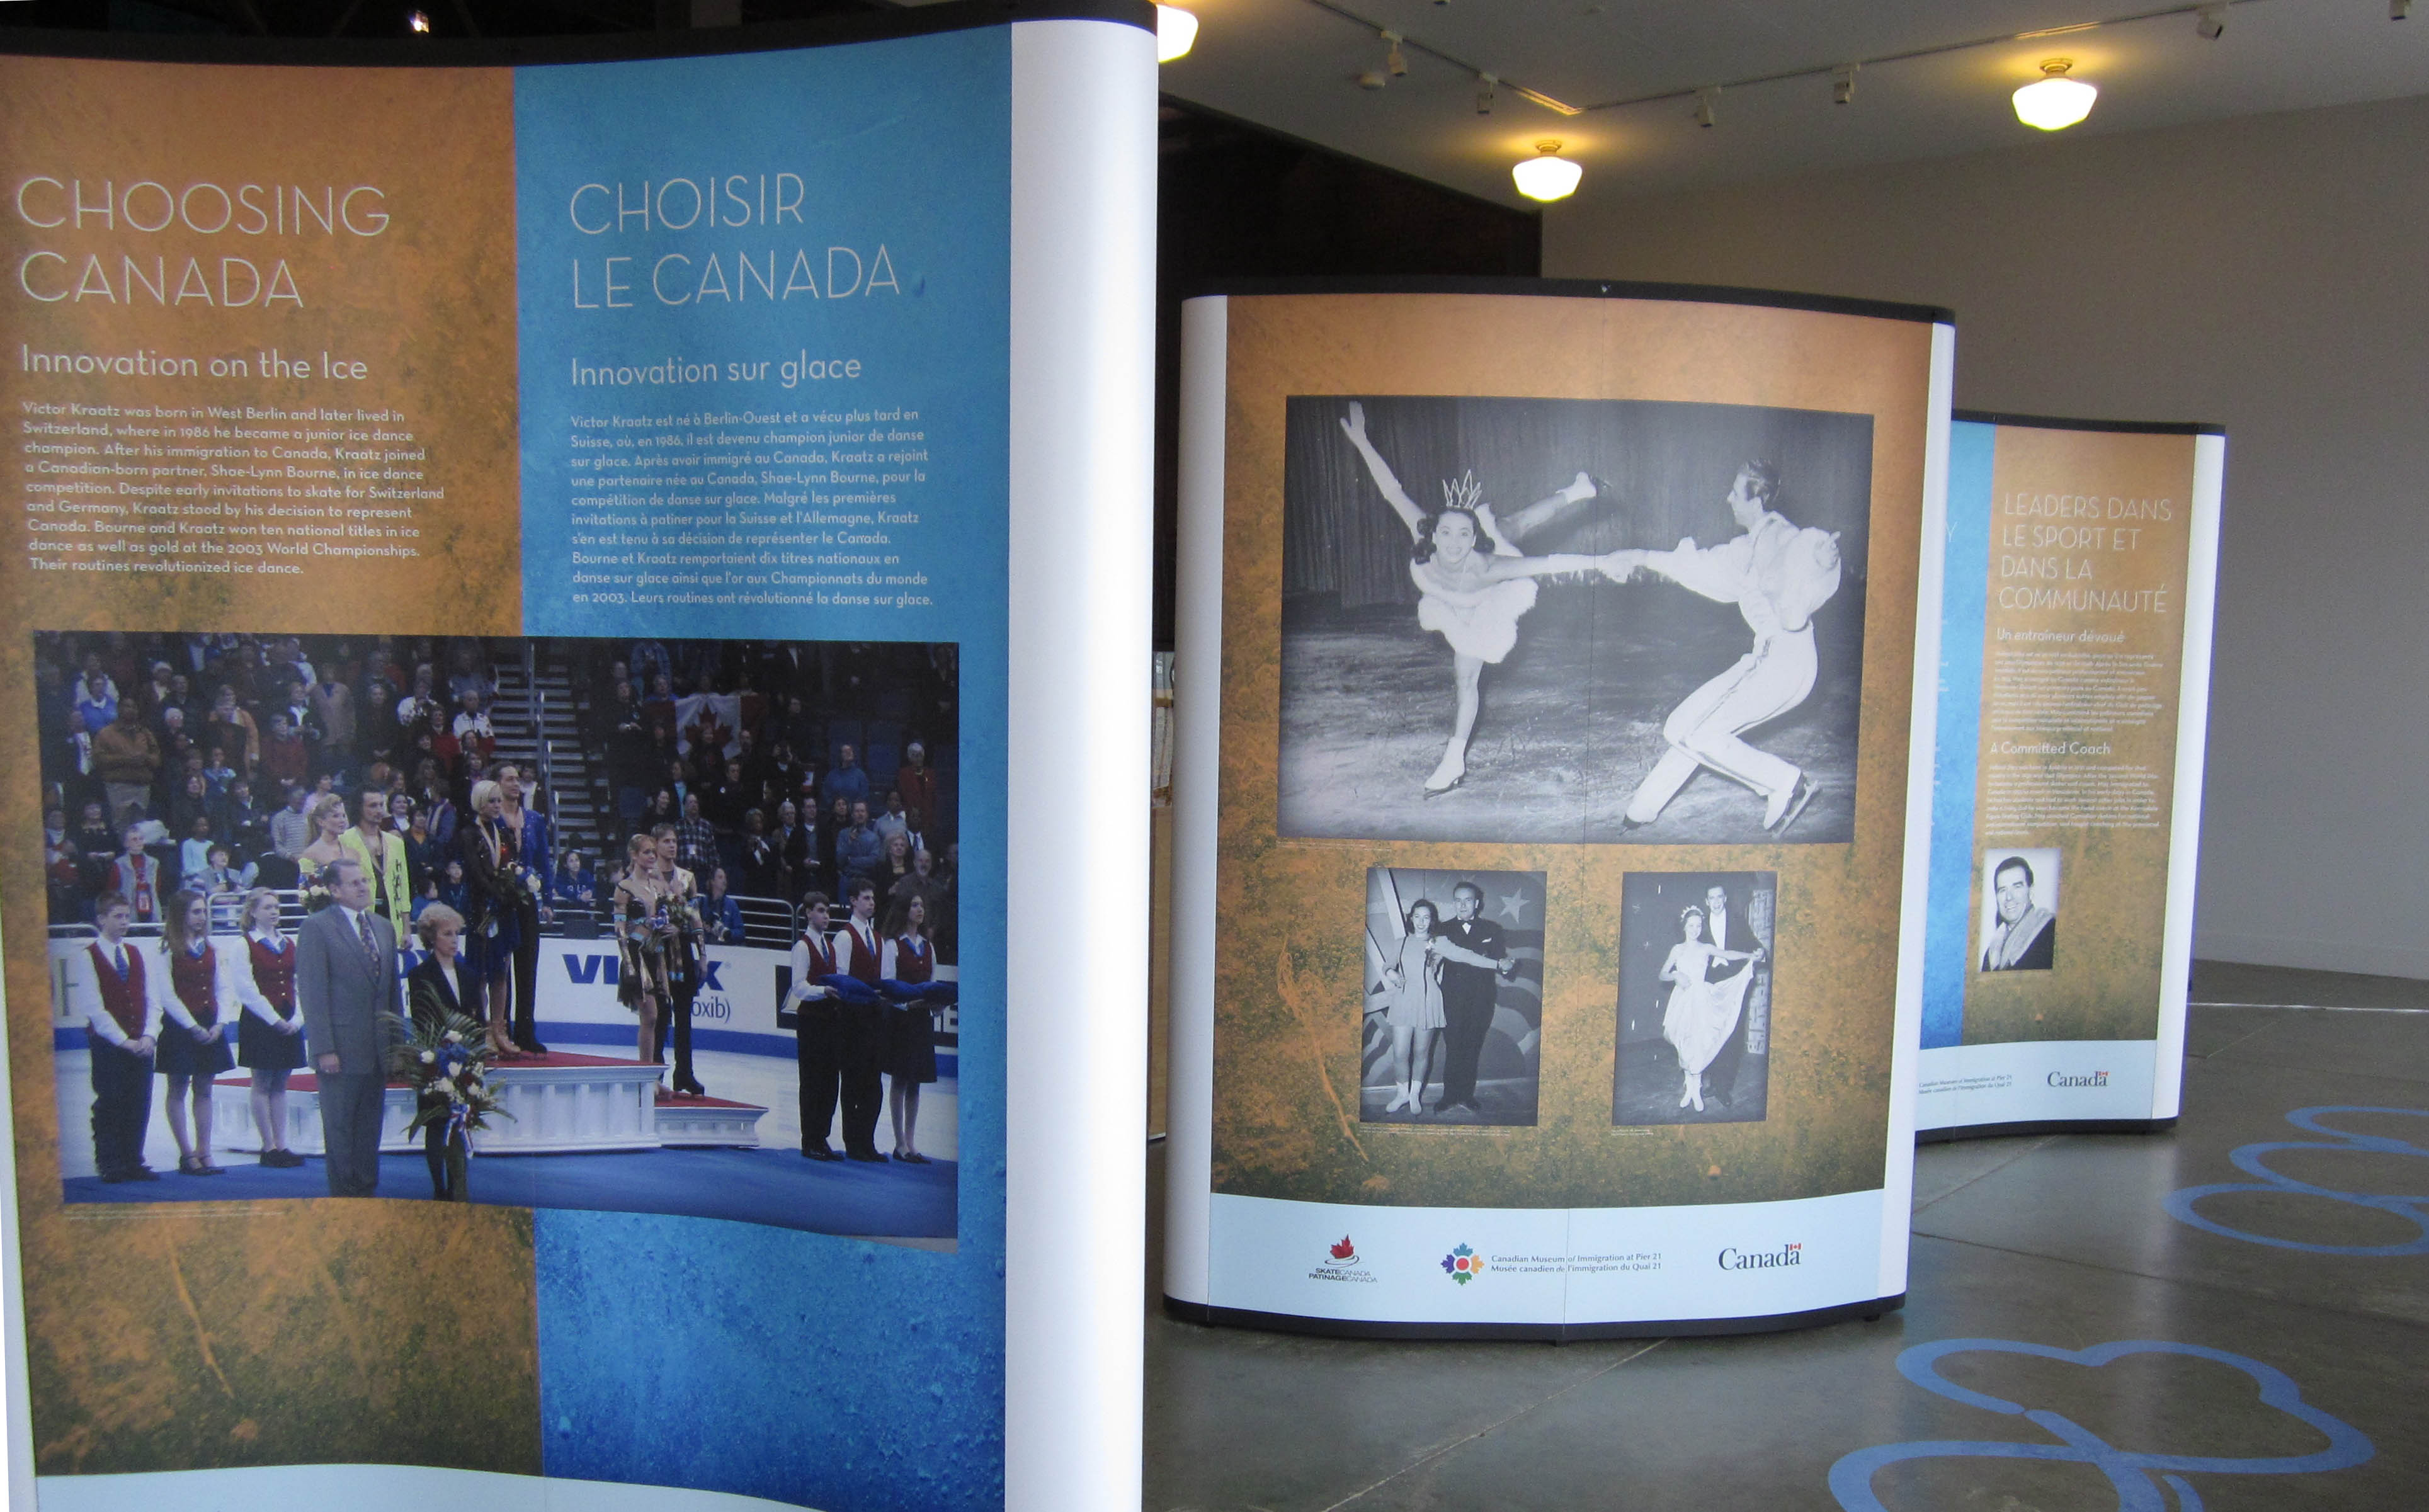 Perfect Landings looks at how immigrants impacted everything from technique to technology in Canadian figure skating.